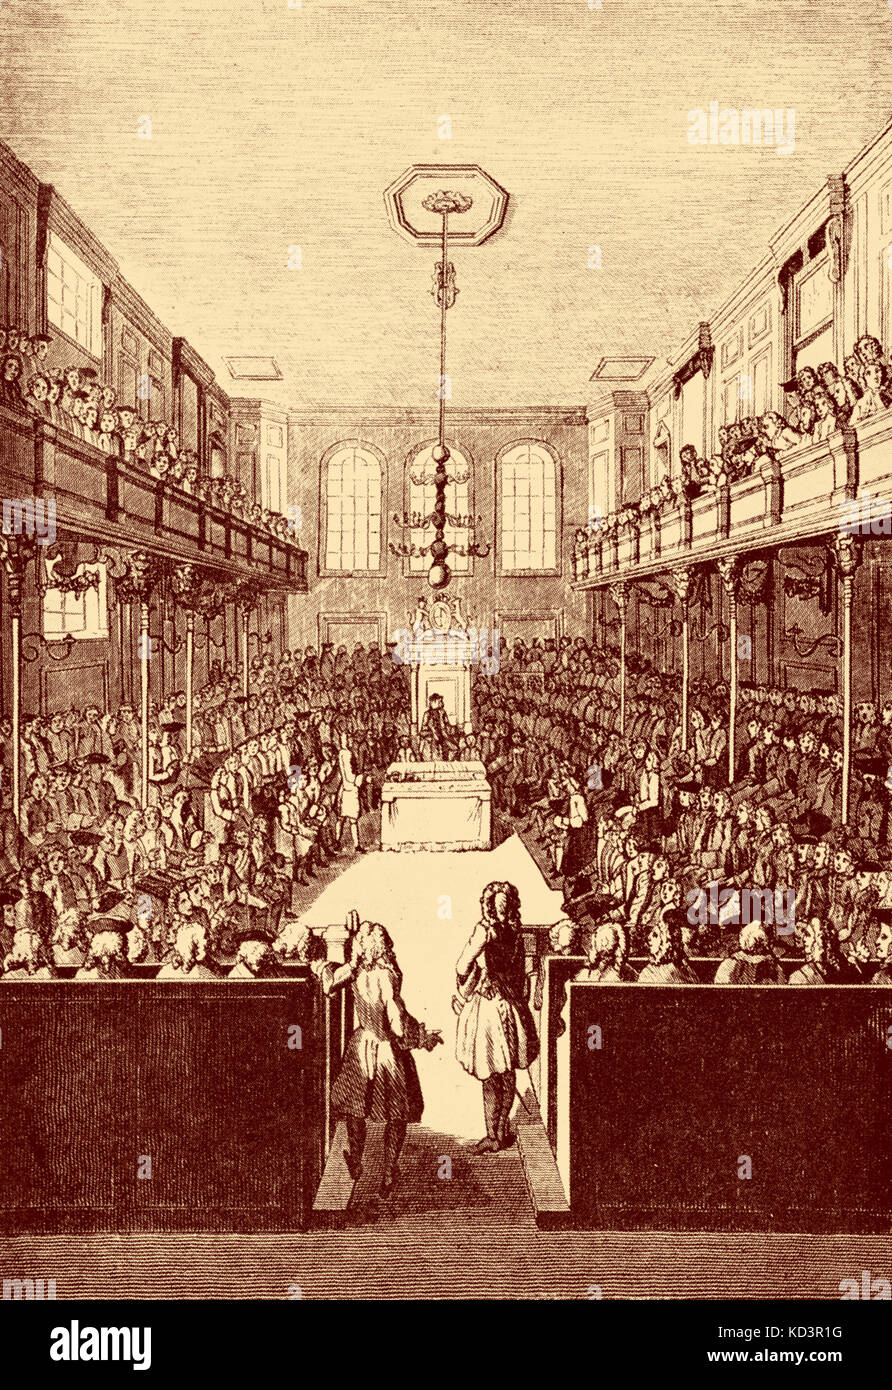 House of Commons during the reign of George II, London. Engraving by William Hogarth. 18th century Stock Photo